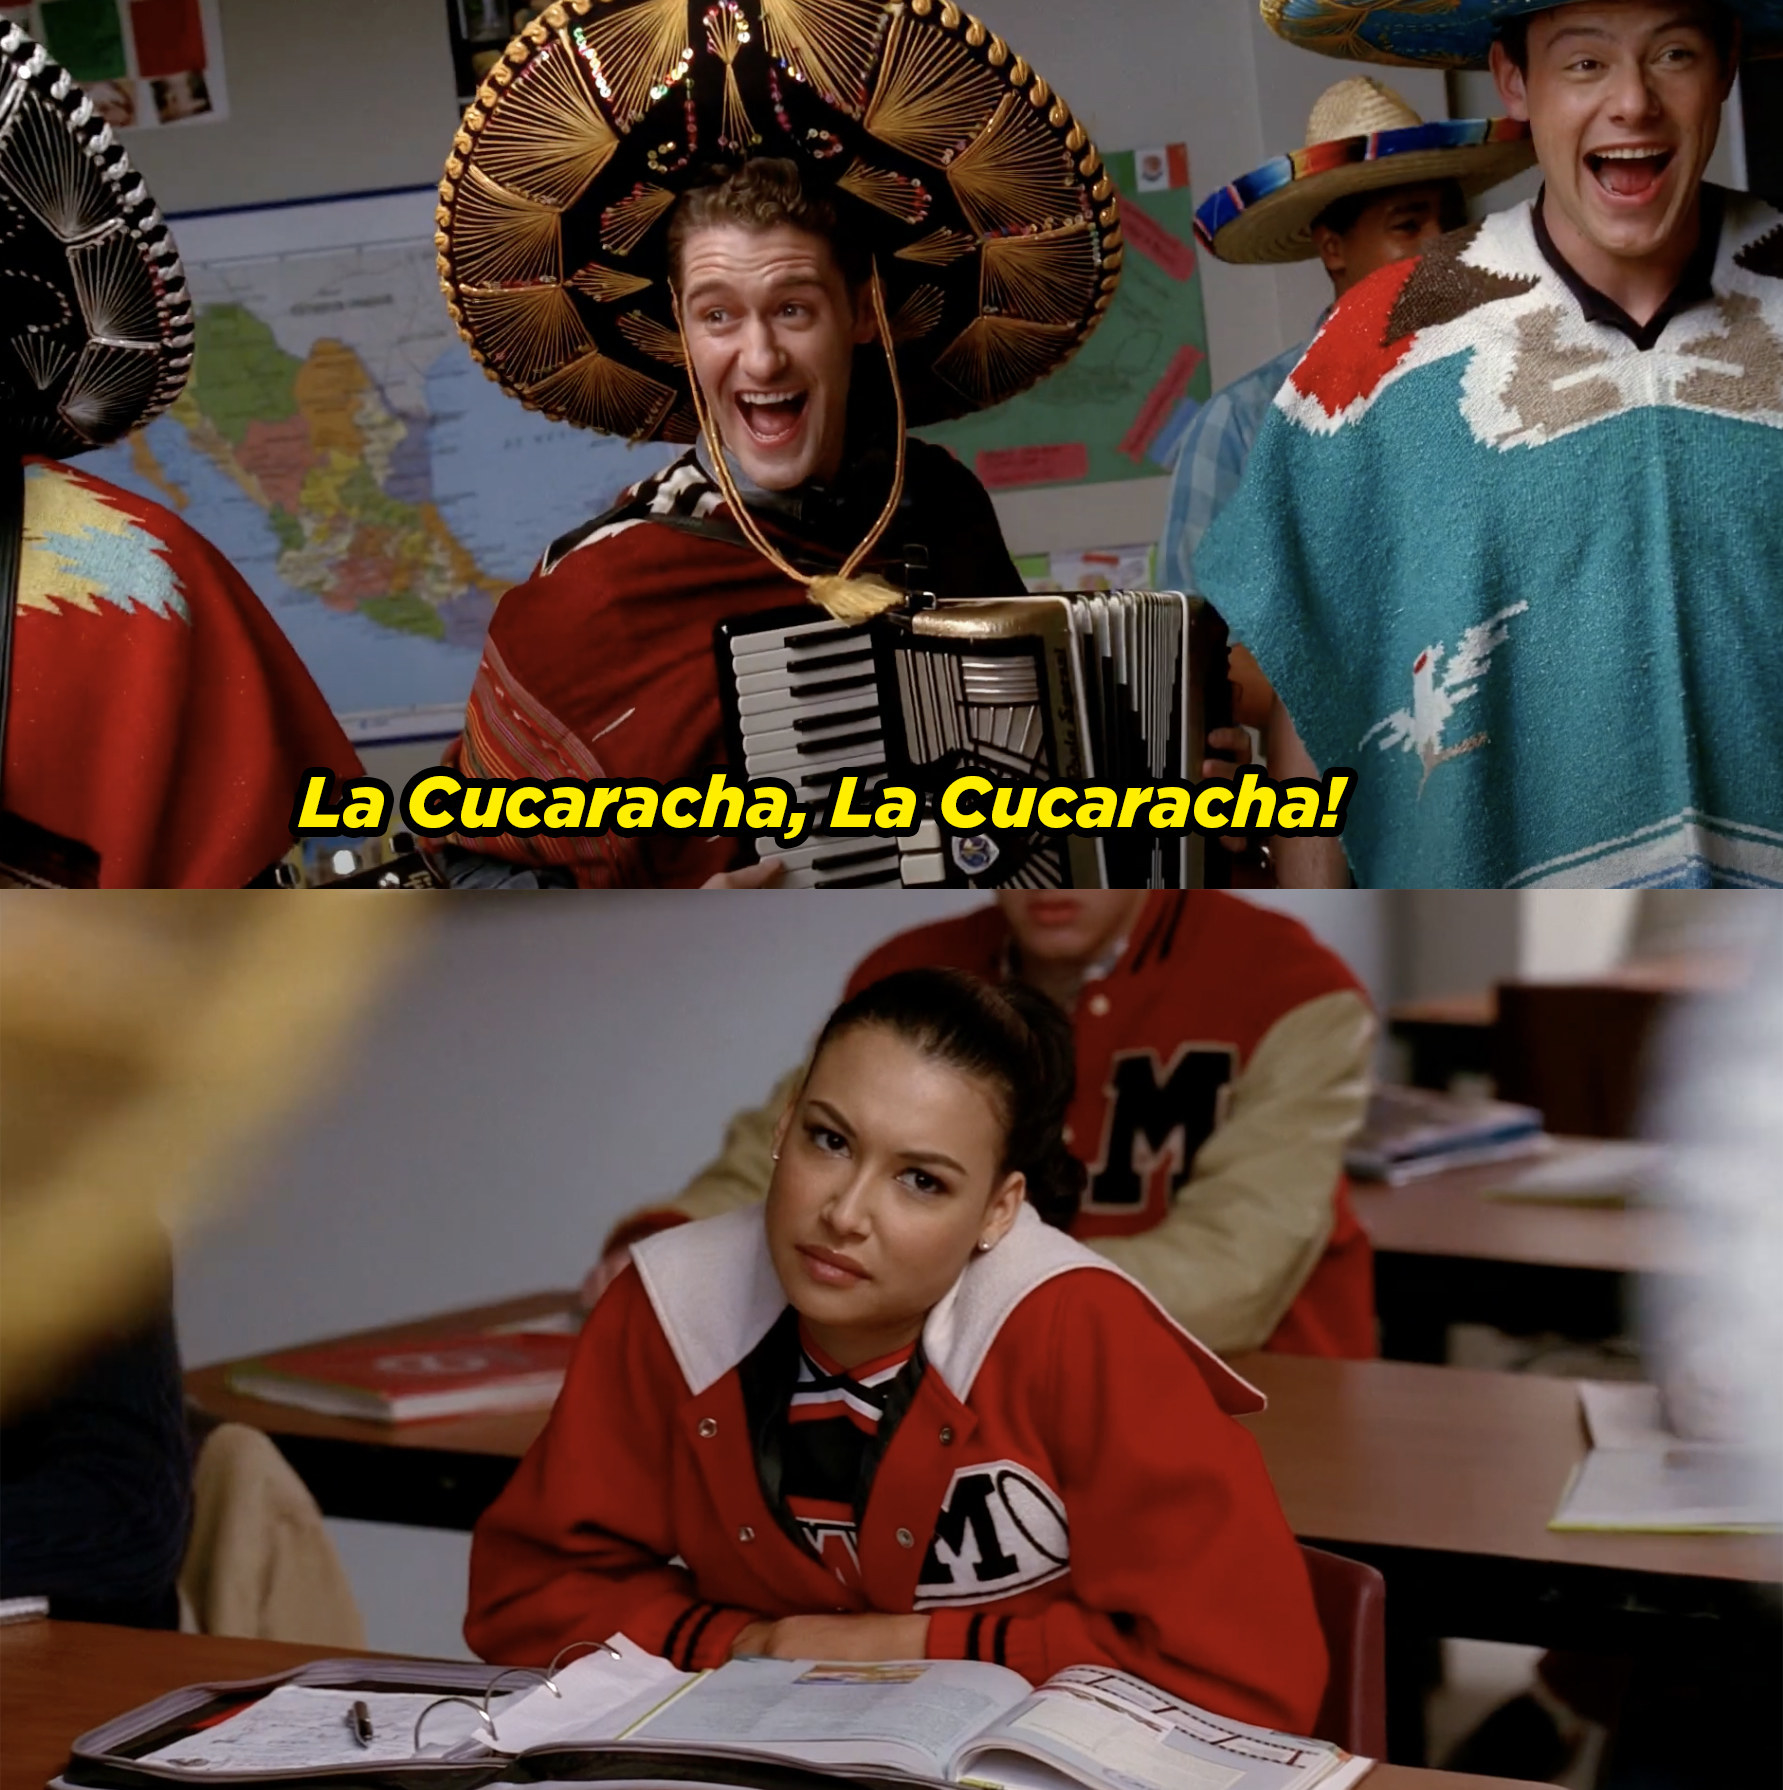 Schue and students perform La Cucaracha, while his student look disgusted